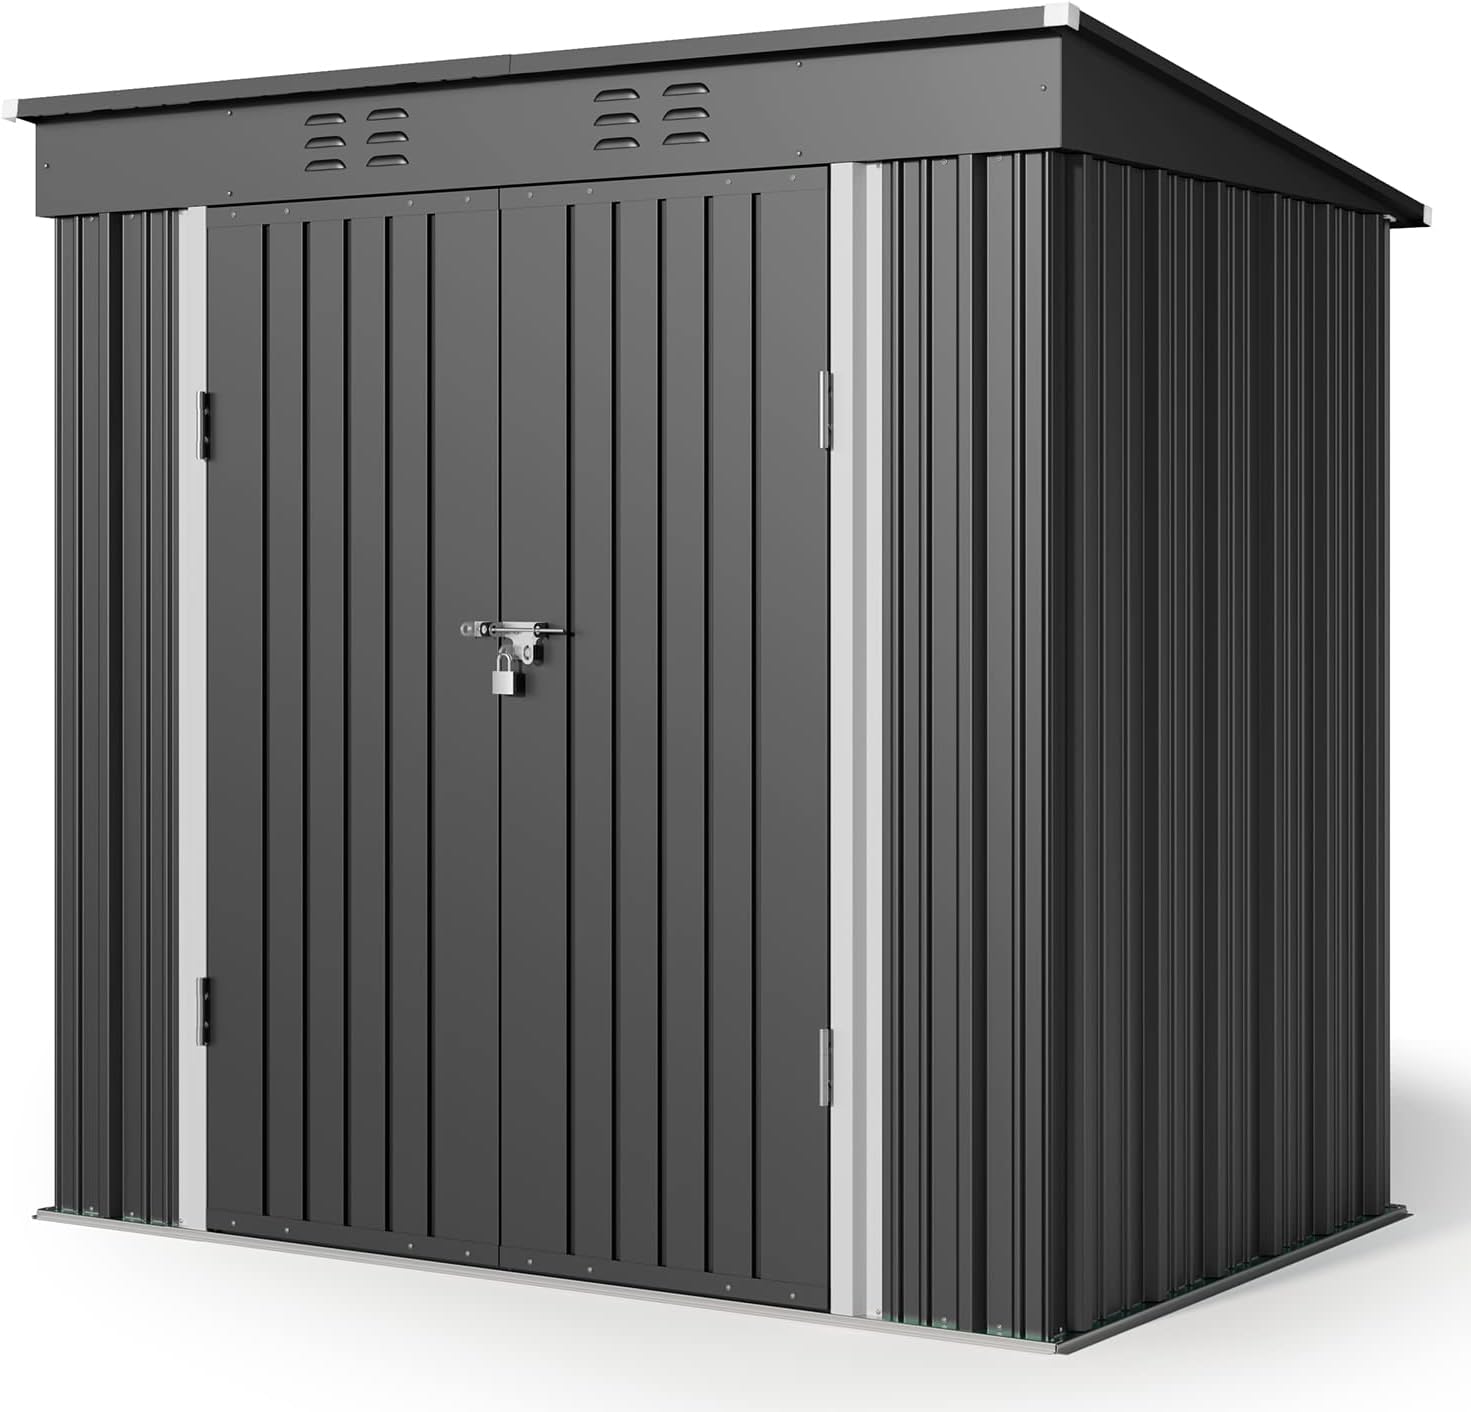 Gizoon 6x4 Outdoor Storage Shed